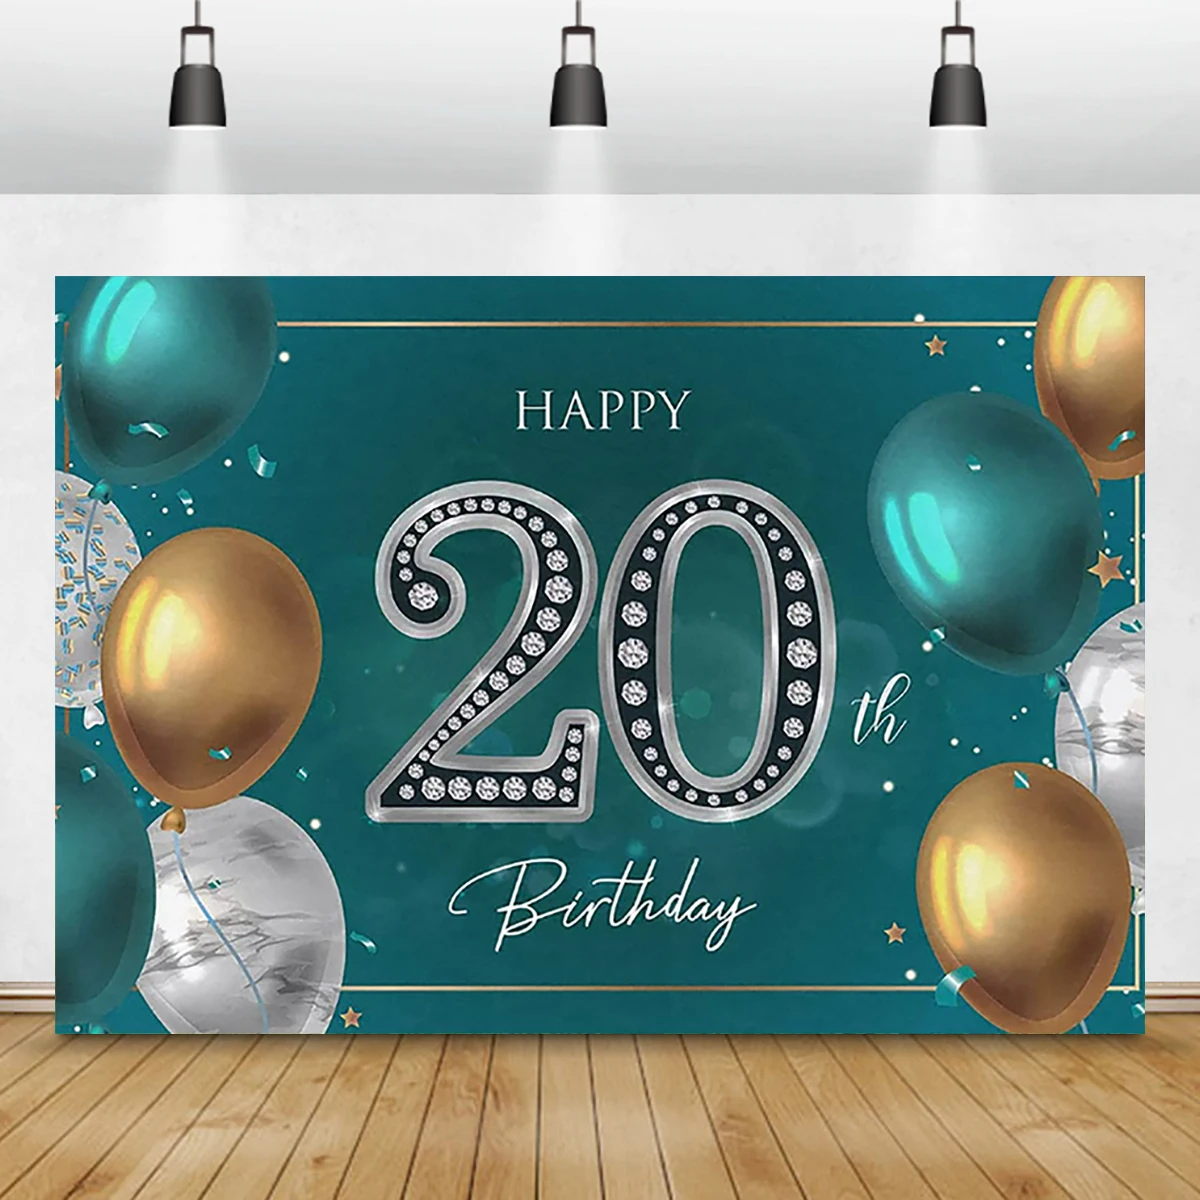 

Happy 20th Birthday Golden Balloons Party Decorations Supplies Banner Welcome Twenty Years Old Family Photo Adults Photography